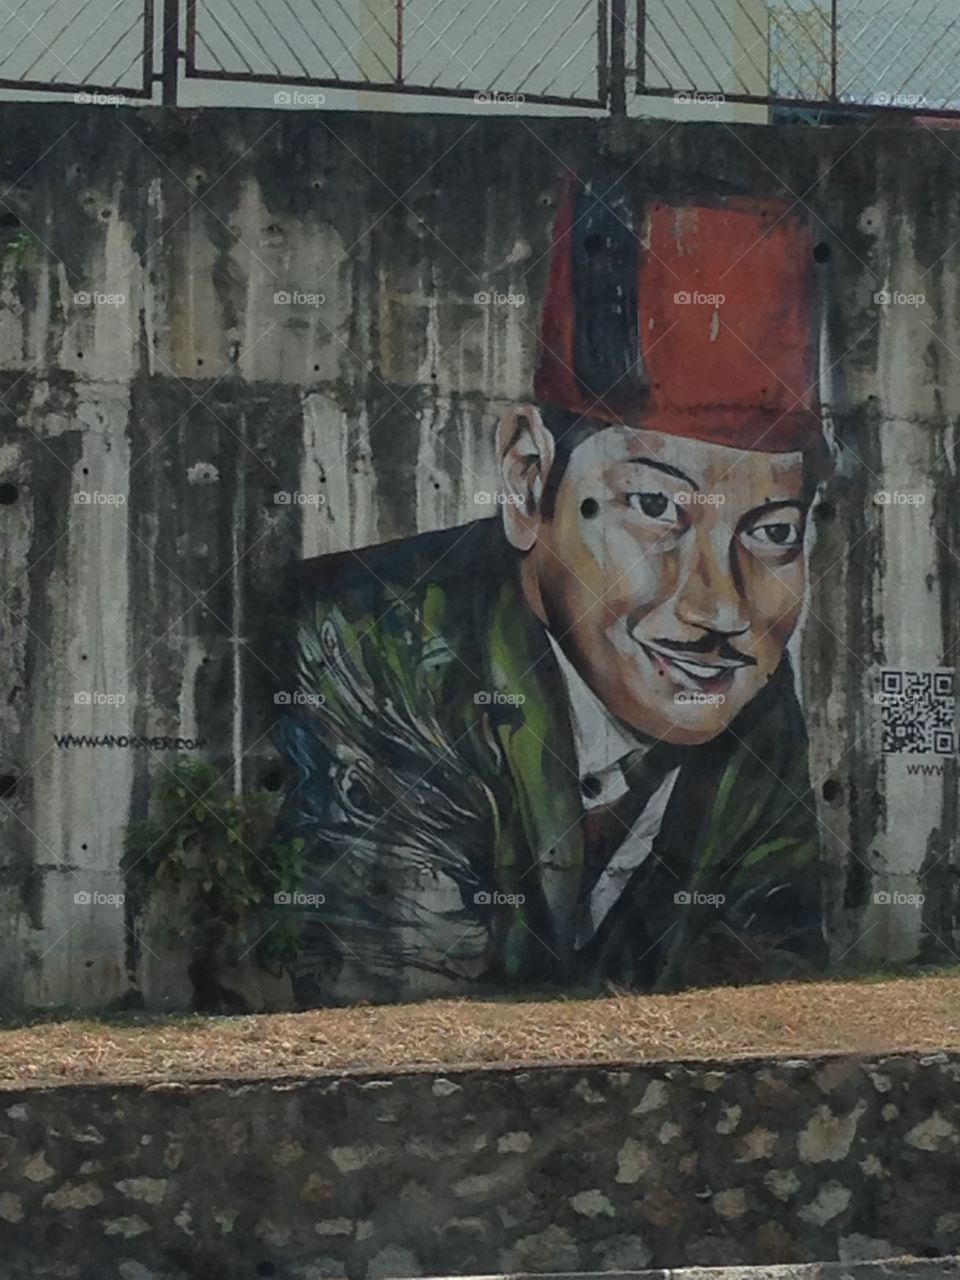 Iconic painting of P Ramlee. Road side painting of this iconic movie actor from the 50s - P. Ramlee rustic painting in Penang along the highway!